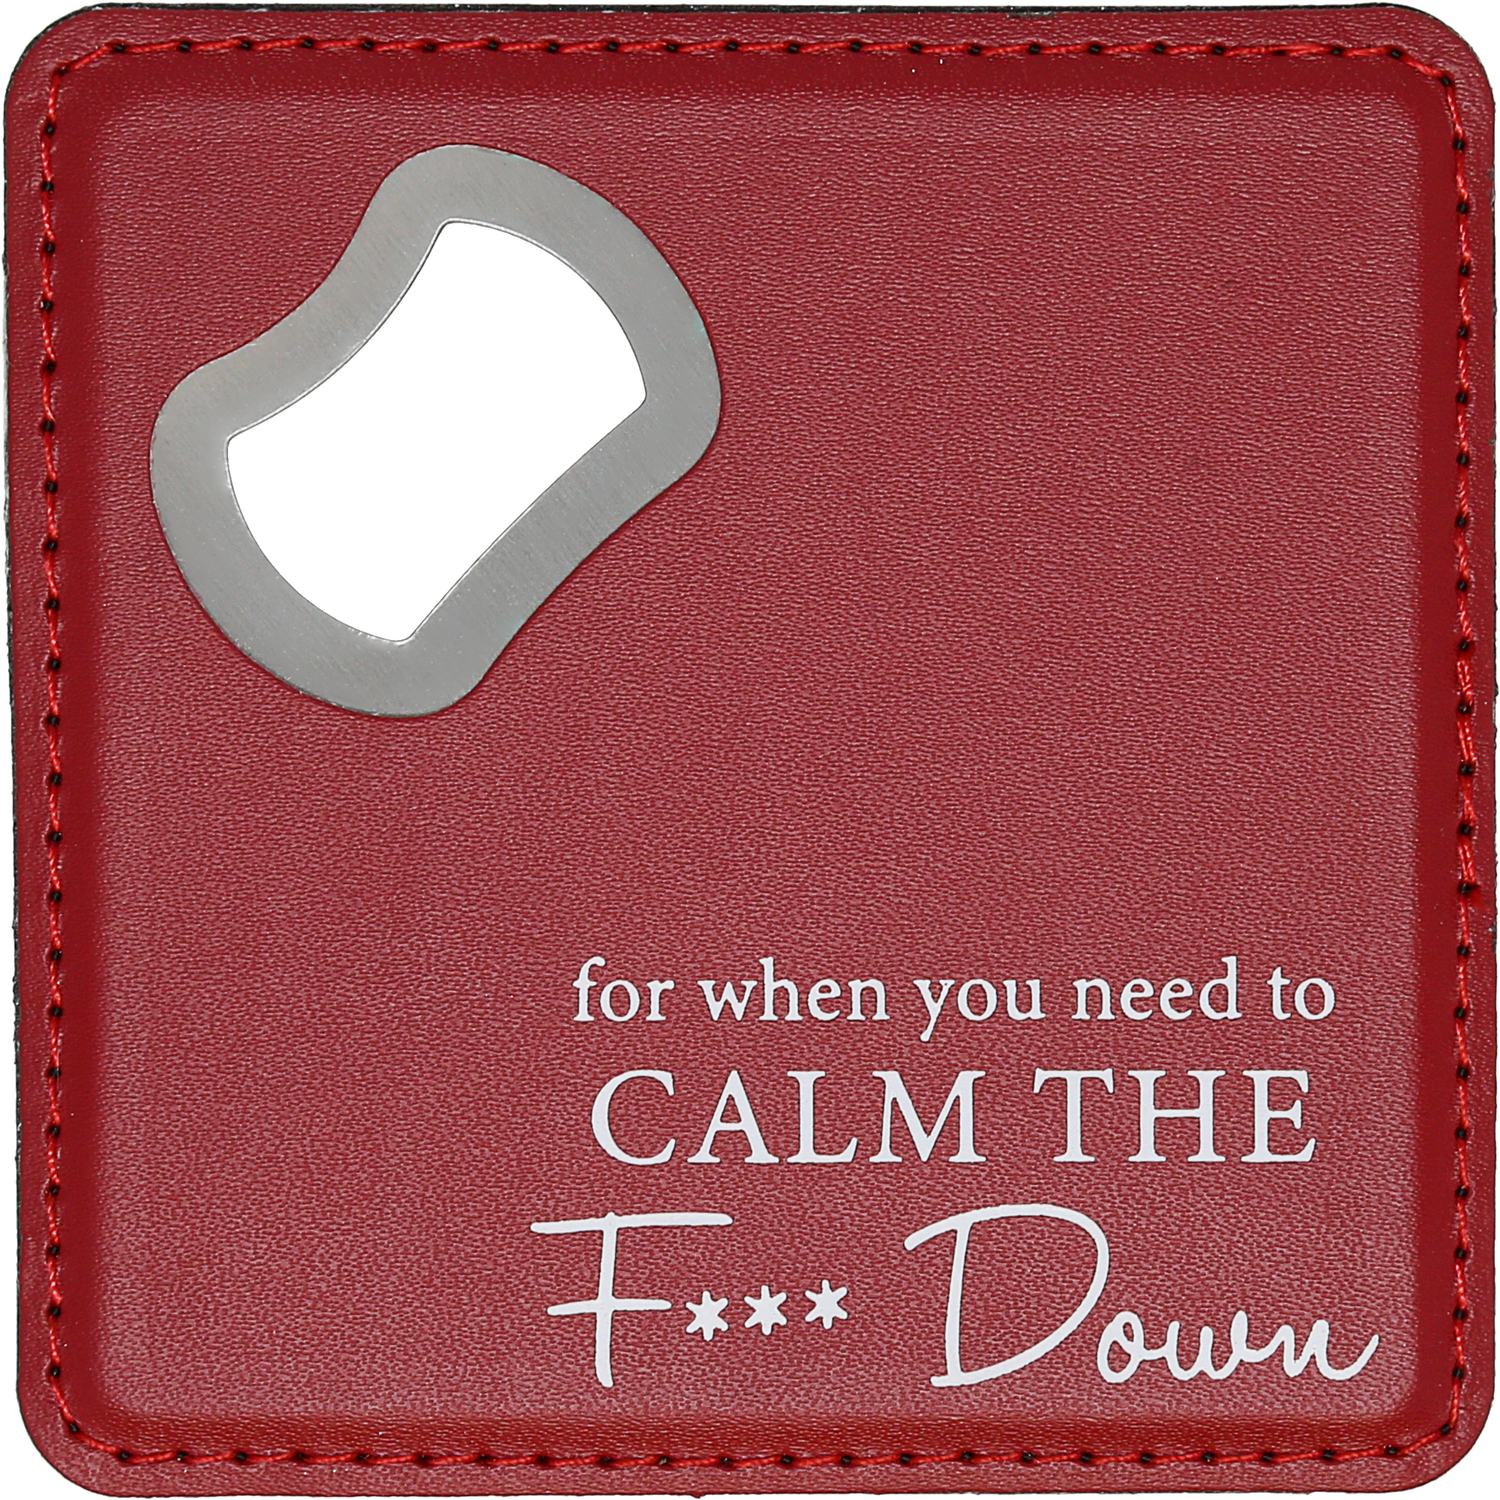 Calm Down by A-Parent-ly - Calm Down - 4" x 4" Bottle Opener Coaster